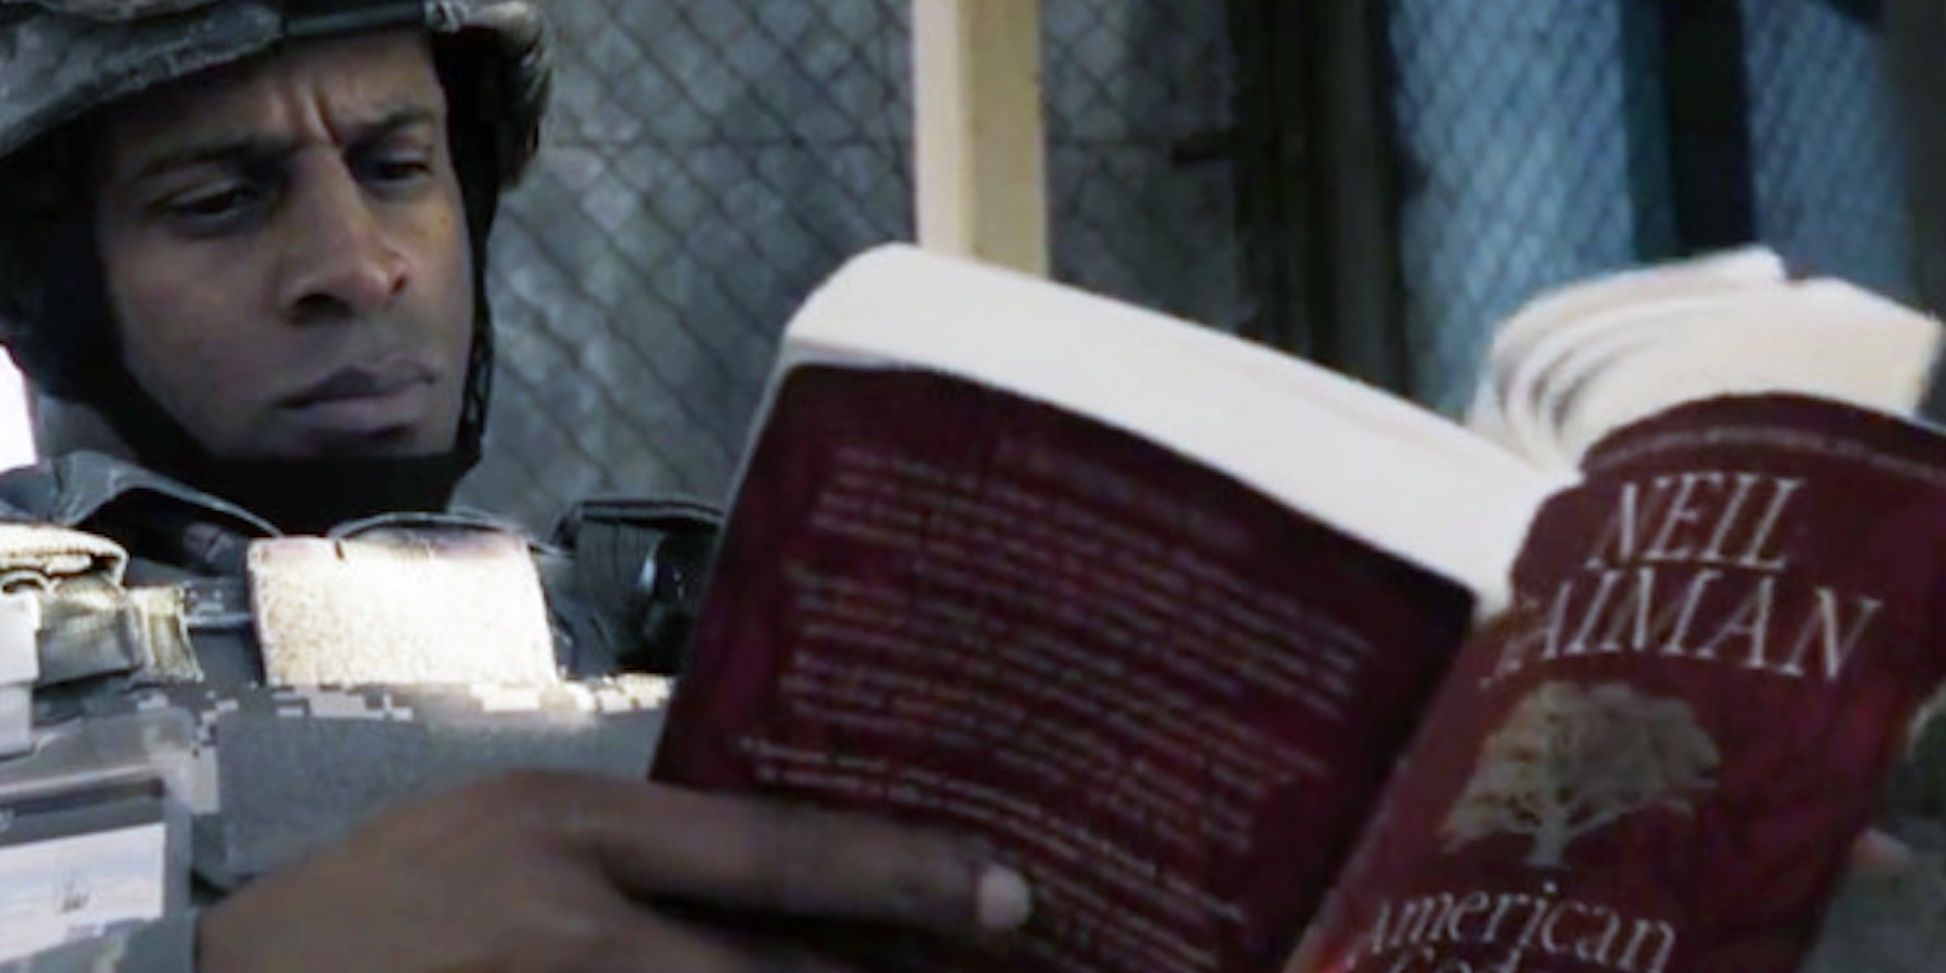 A soldier reads Gaiman's American Gods in Good Omens.